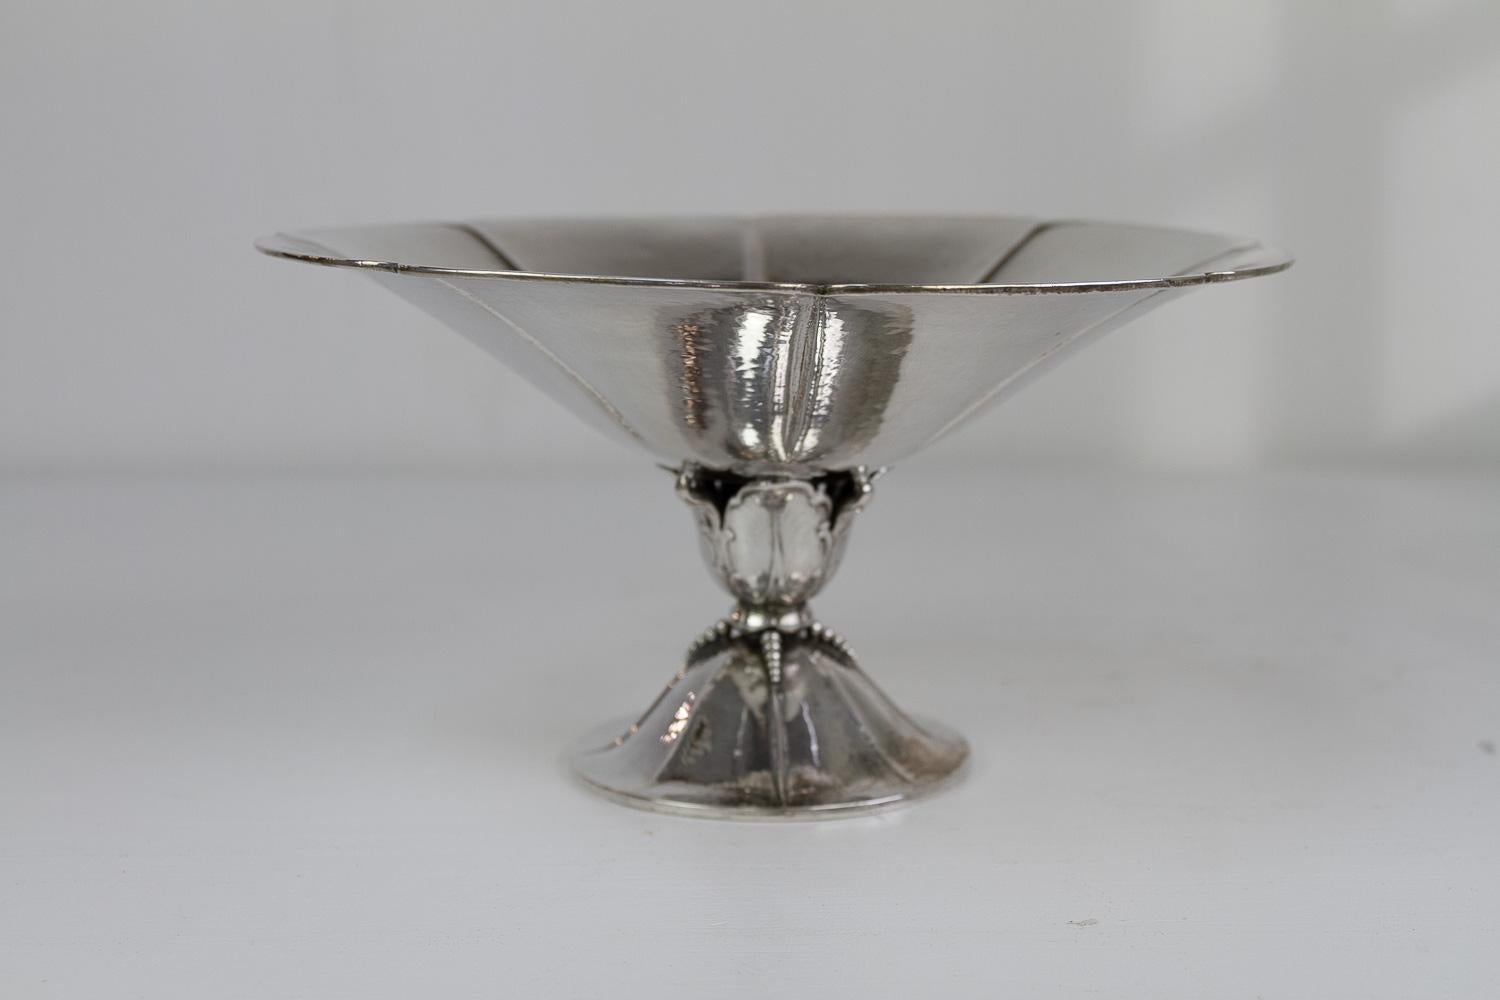 Antique Danish Silver Bowl, 1920s.

Elegant bowl in hammered silver made in Denmark in the 1920s. Originally used a sugar or candy bowl.

Stamped with three towers (made in Denmark of 830 silver) and 22 (made in the year 1922) underneath.
Also